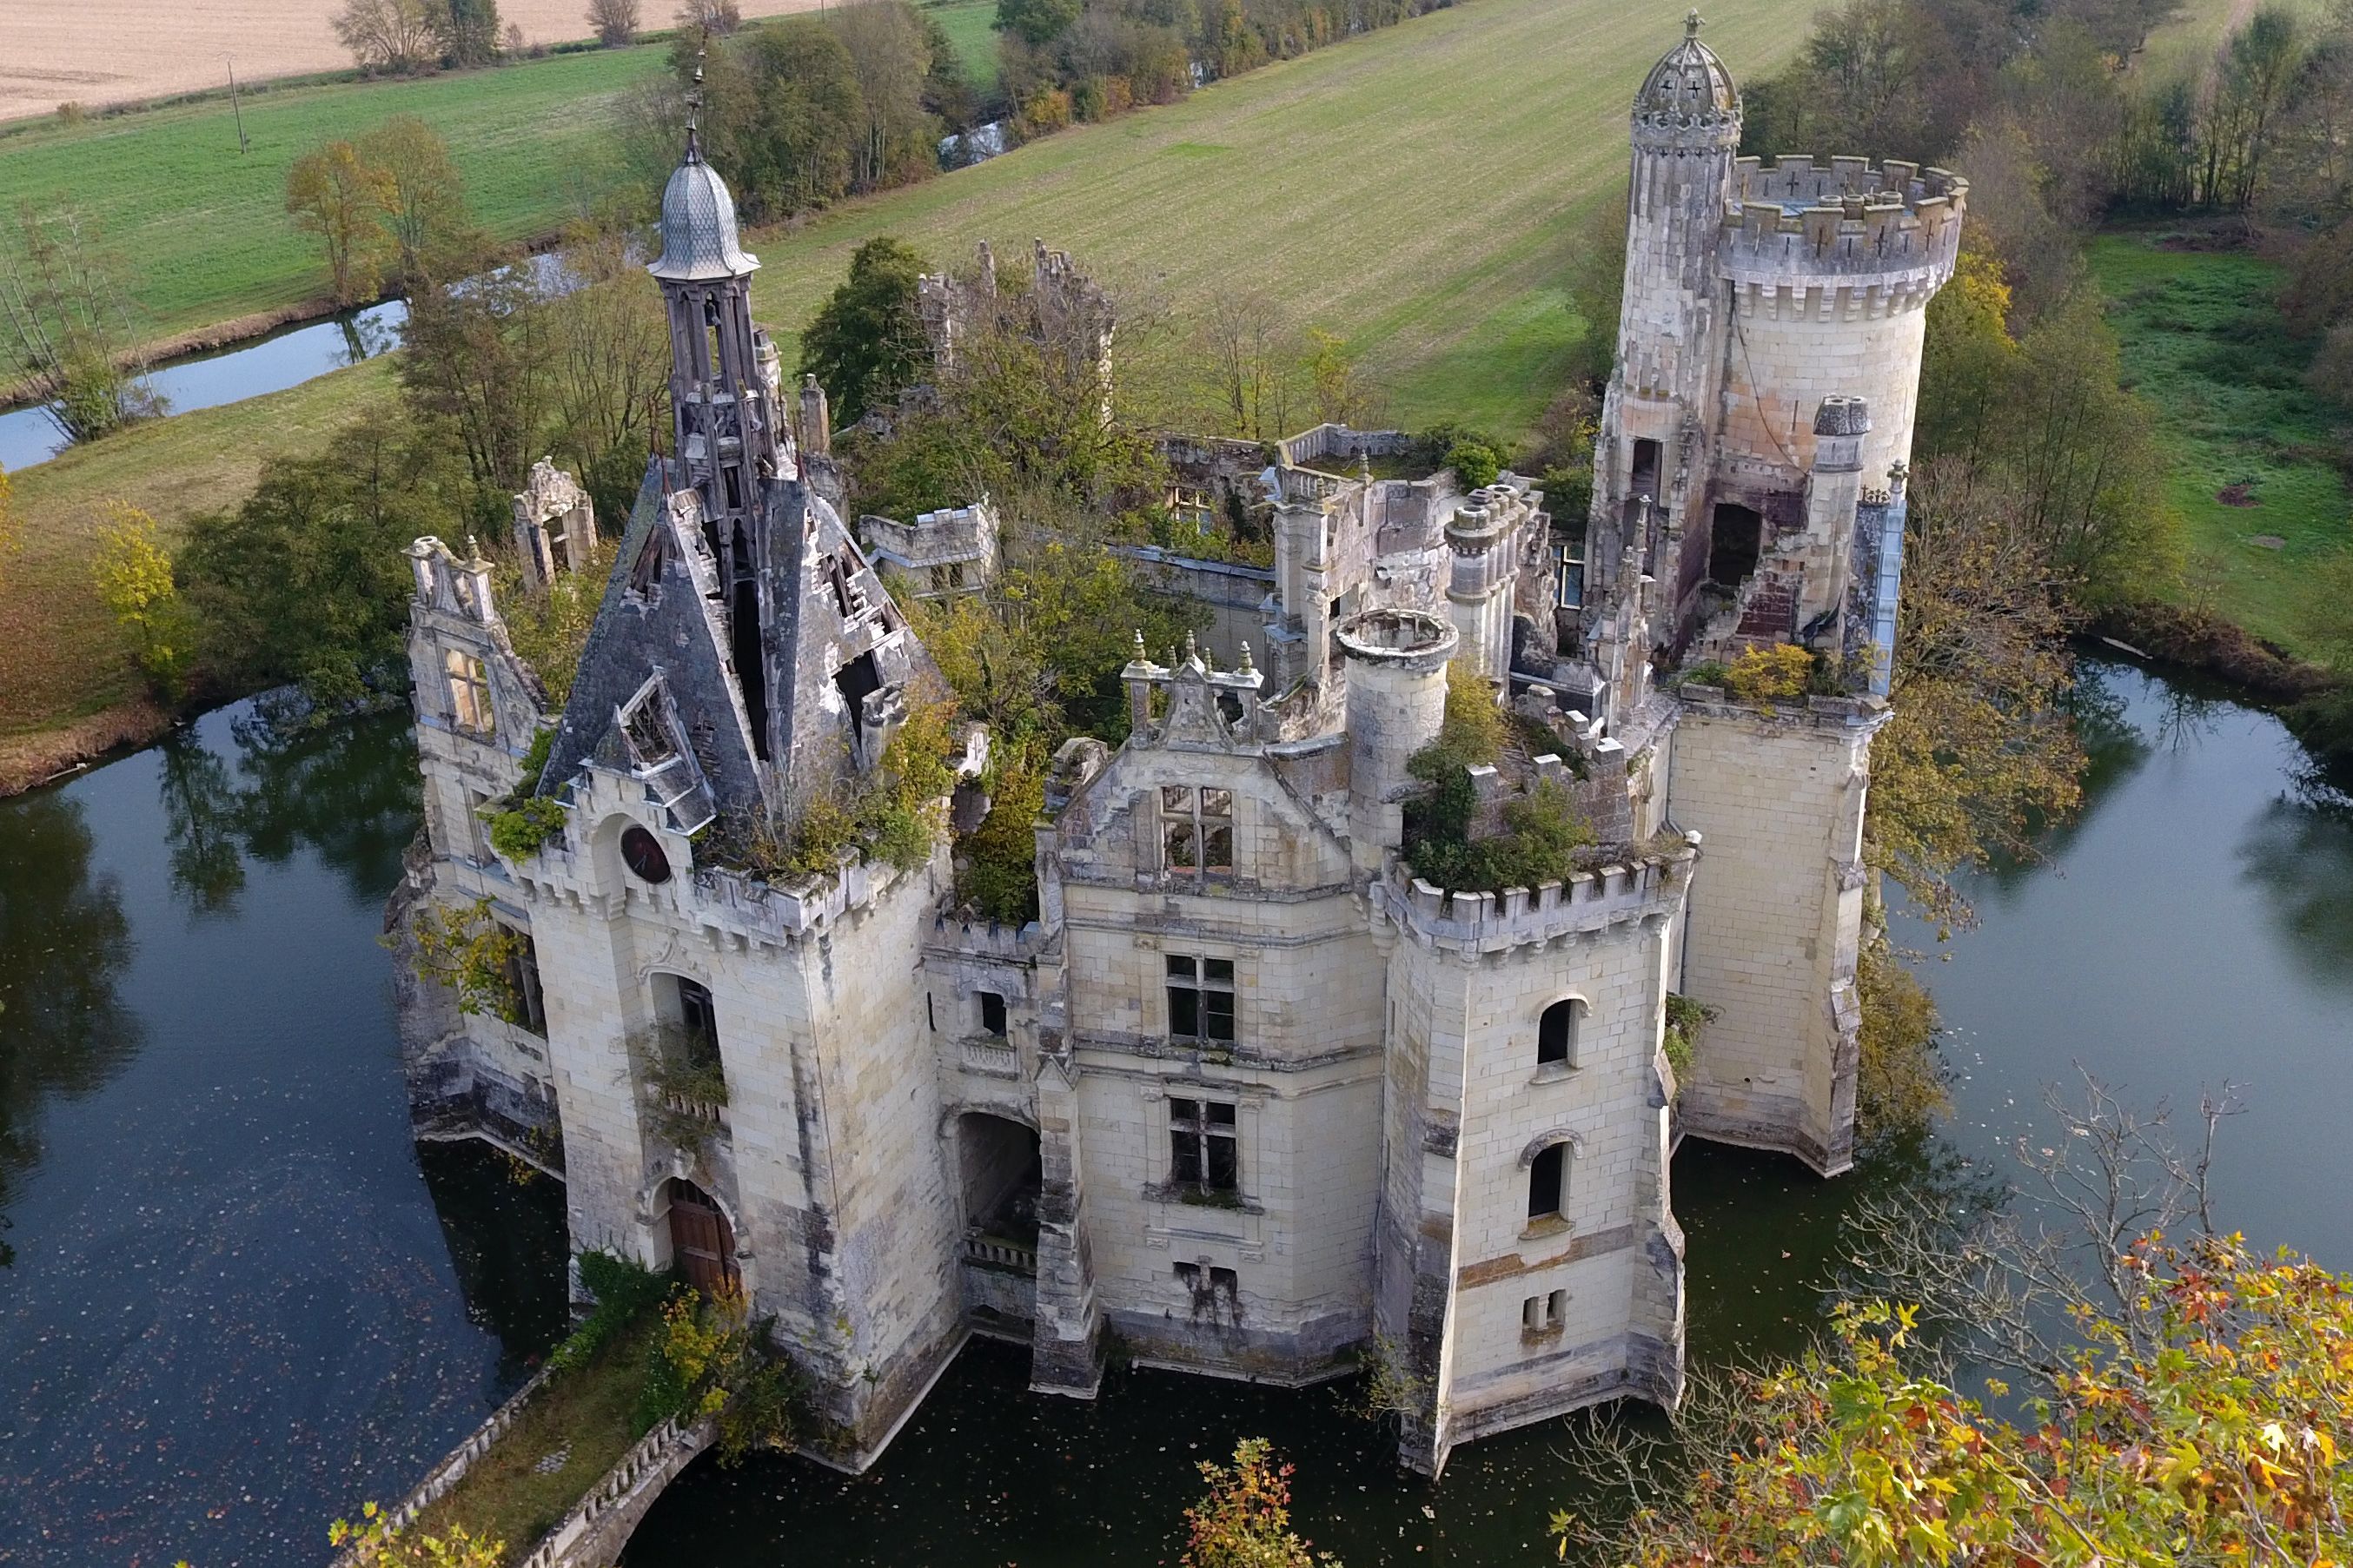 Over 11,000 Strangers Just Bought an Abandoned French Castle Together